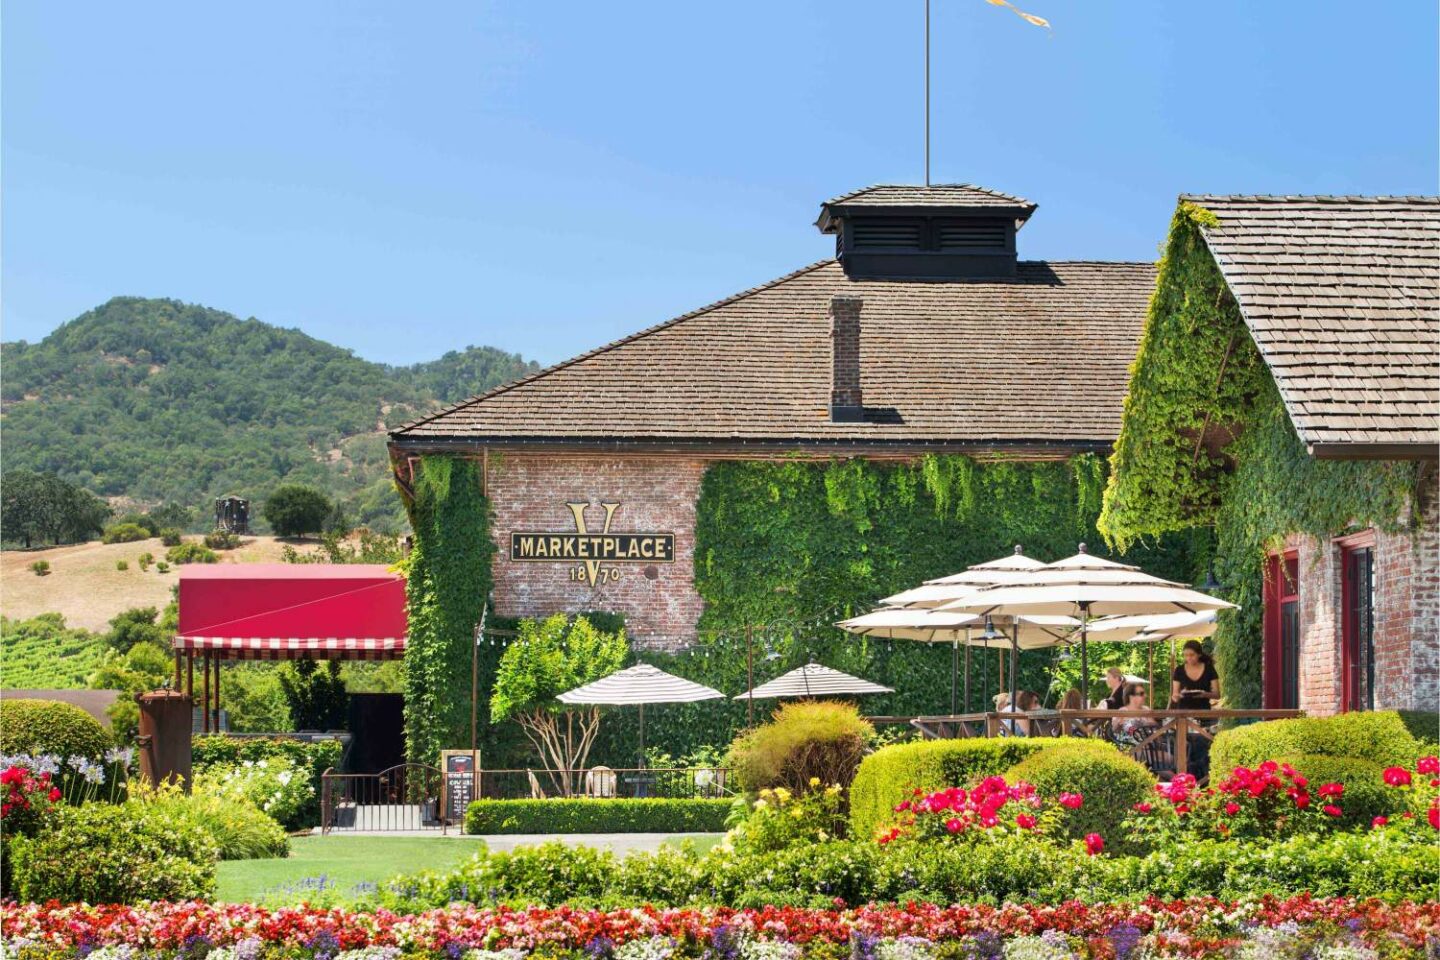 V Marketplace is Yountville